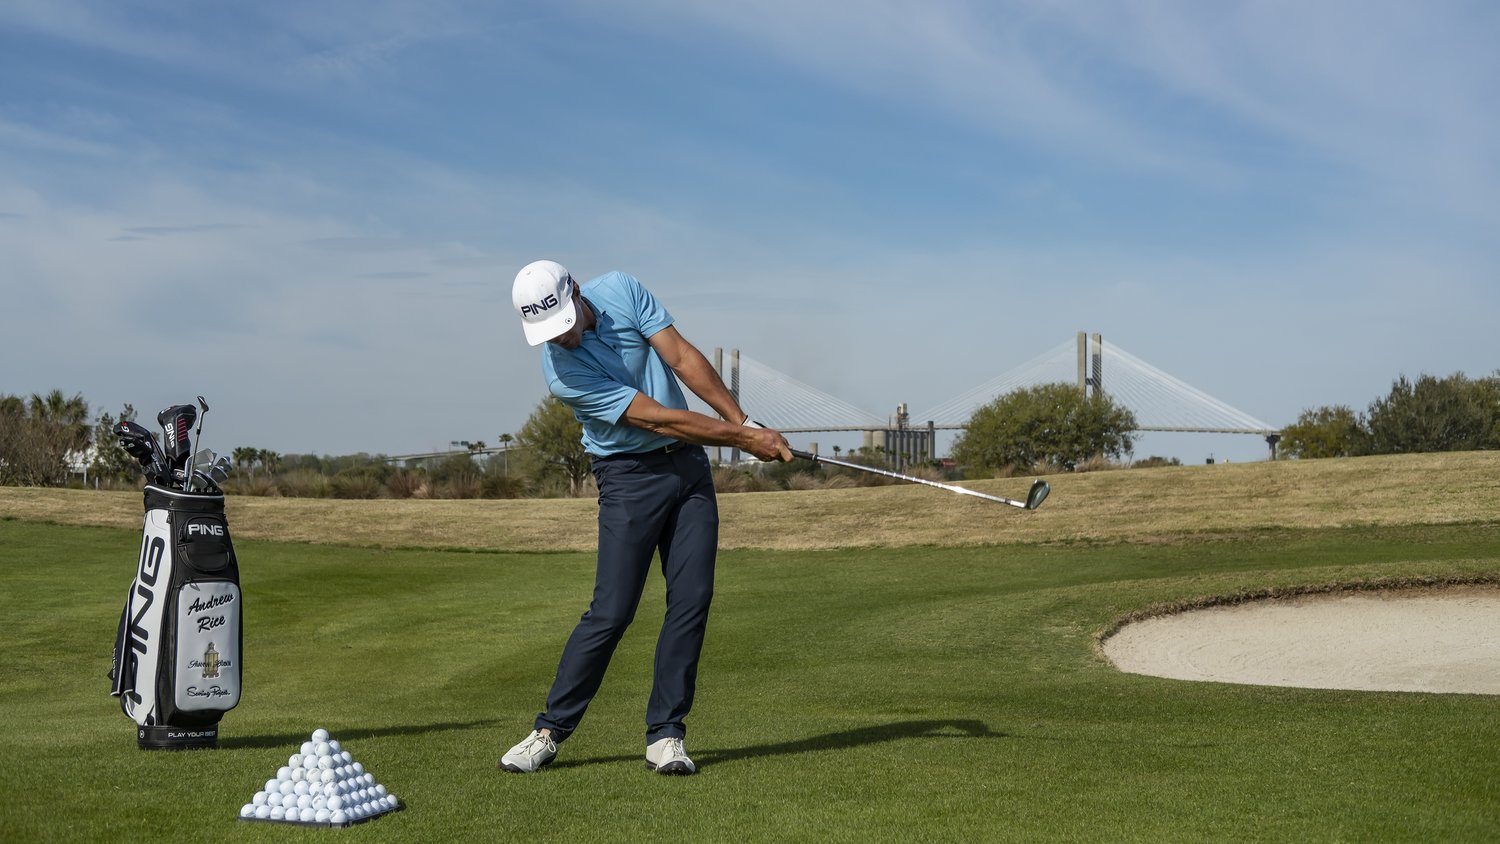 A Drill for Better Strikes & Trajectory